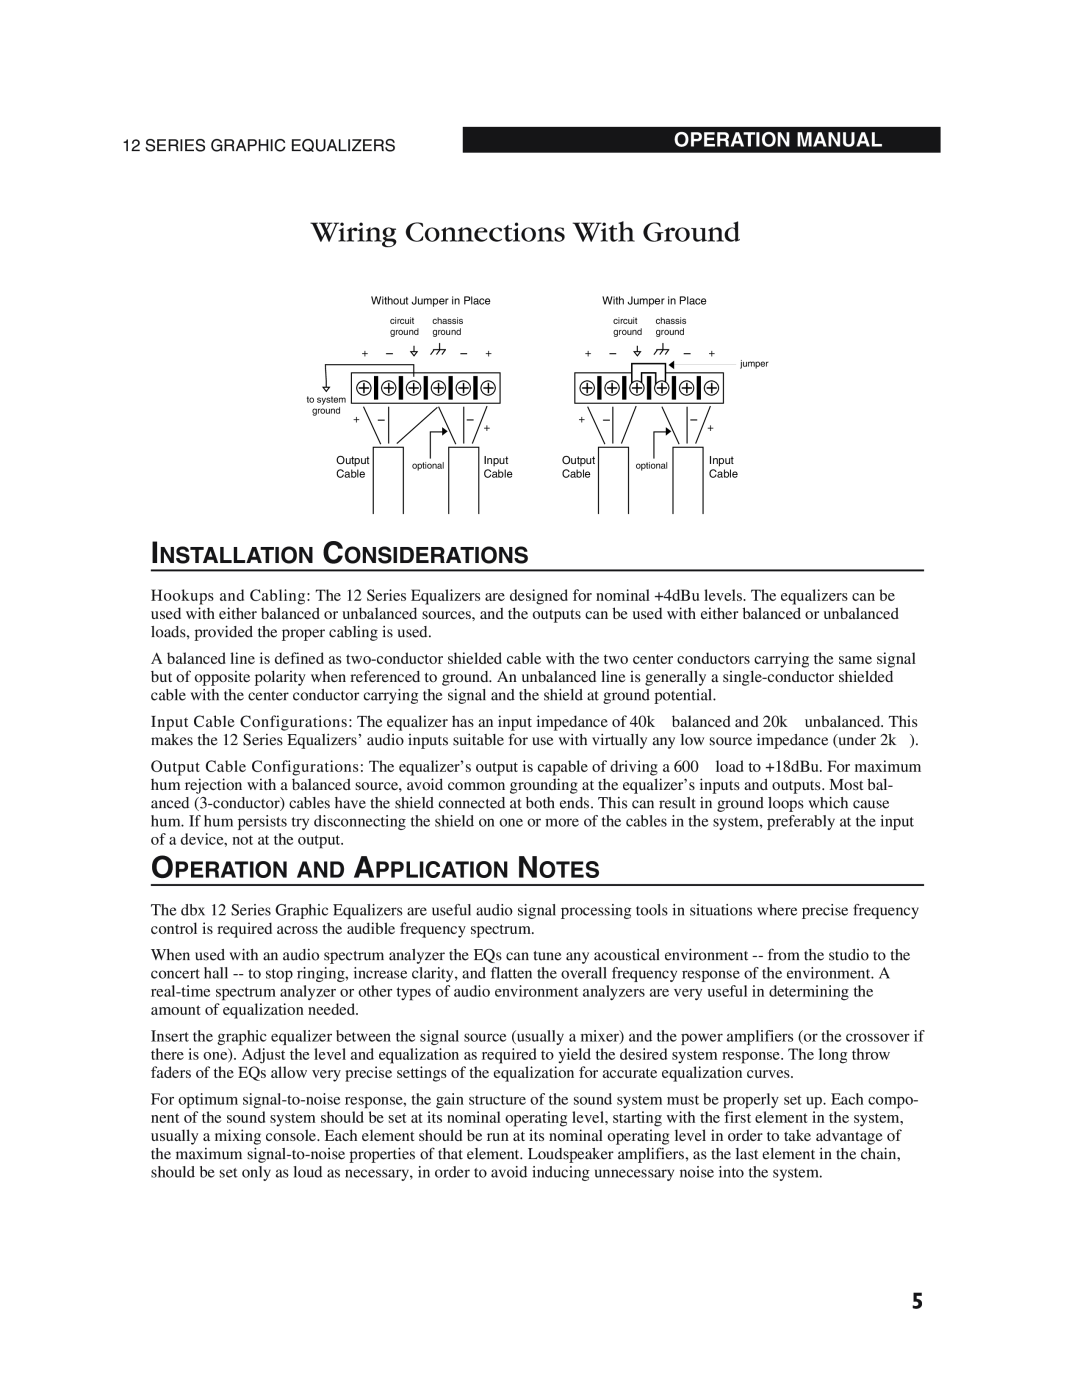 dbx Pro 12 Series Wiring Connections With Ground, Installation Considerations, Operation And Application Notes 